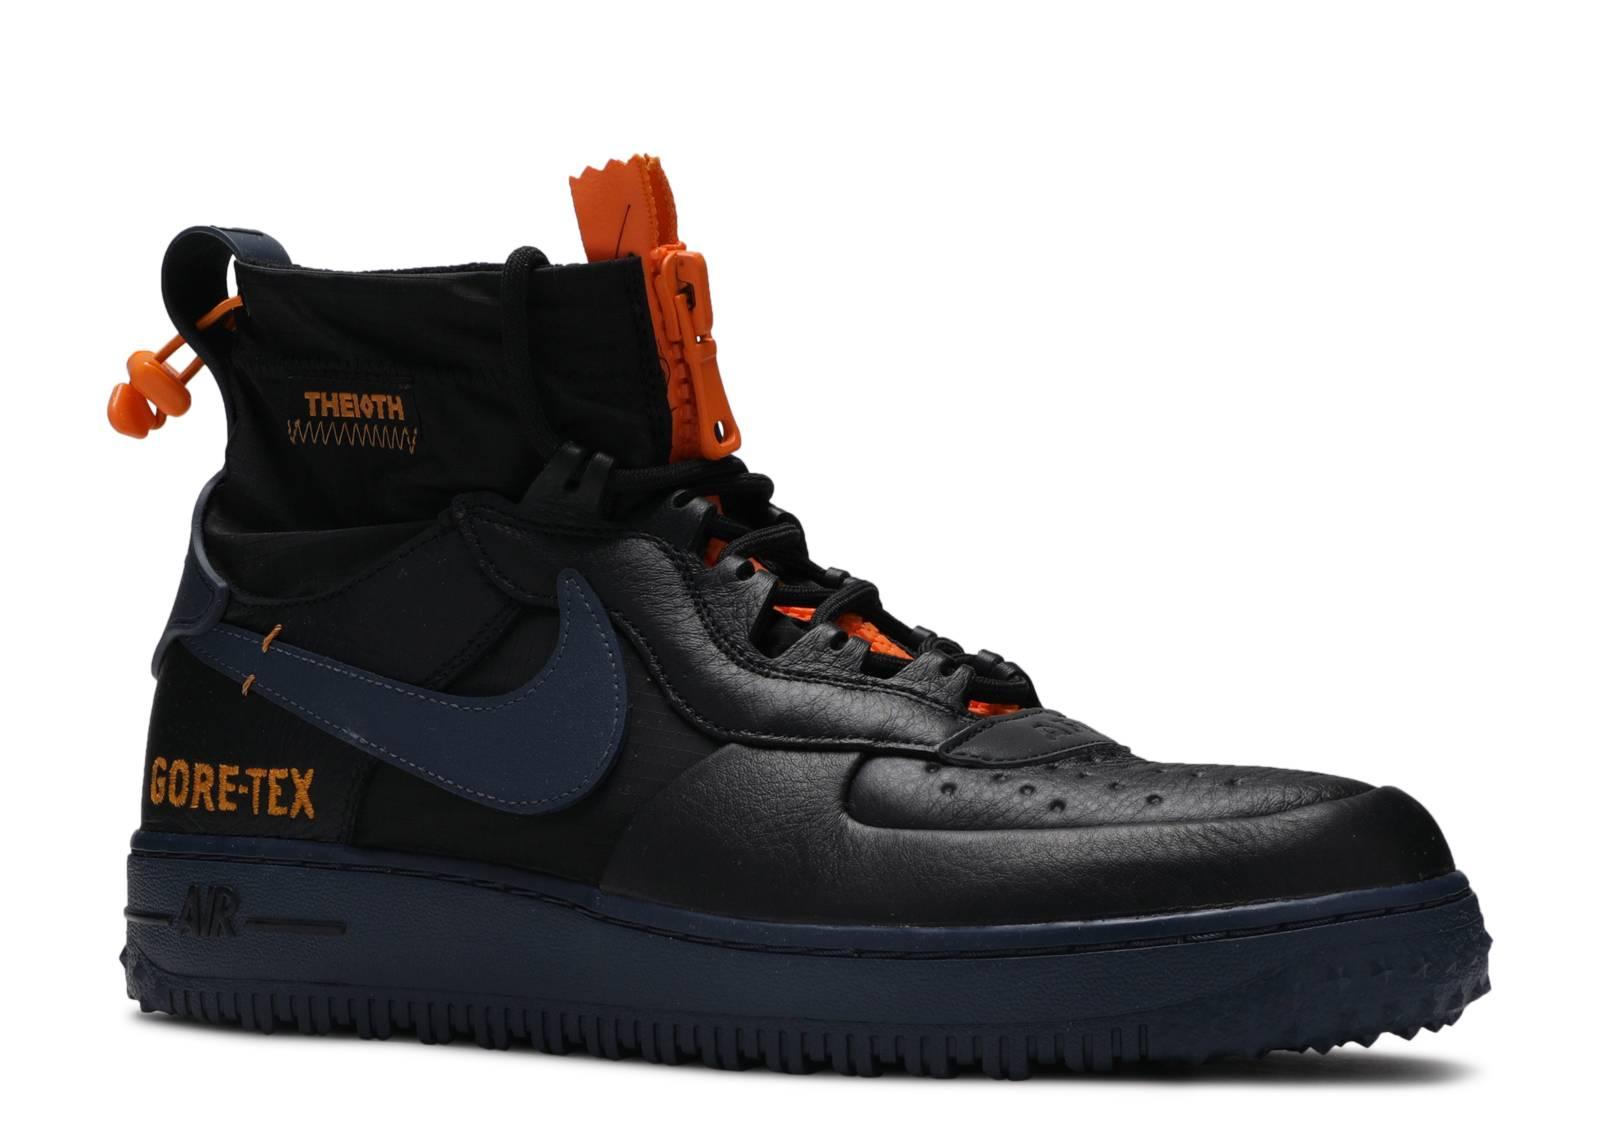 Nike Gore-tex X Air Force 1 High Wtr in Black for Men - Save 27% - Lyst